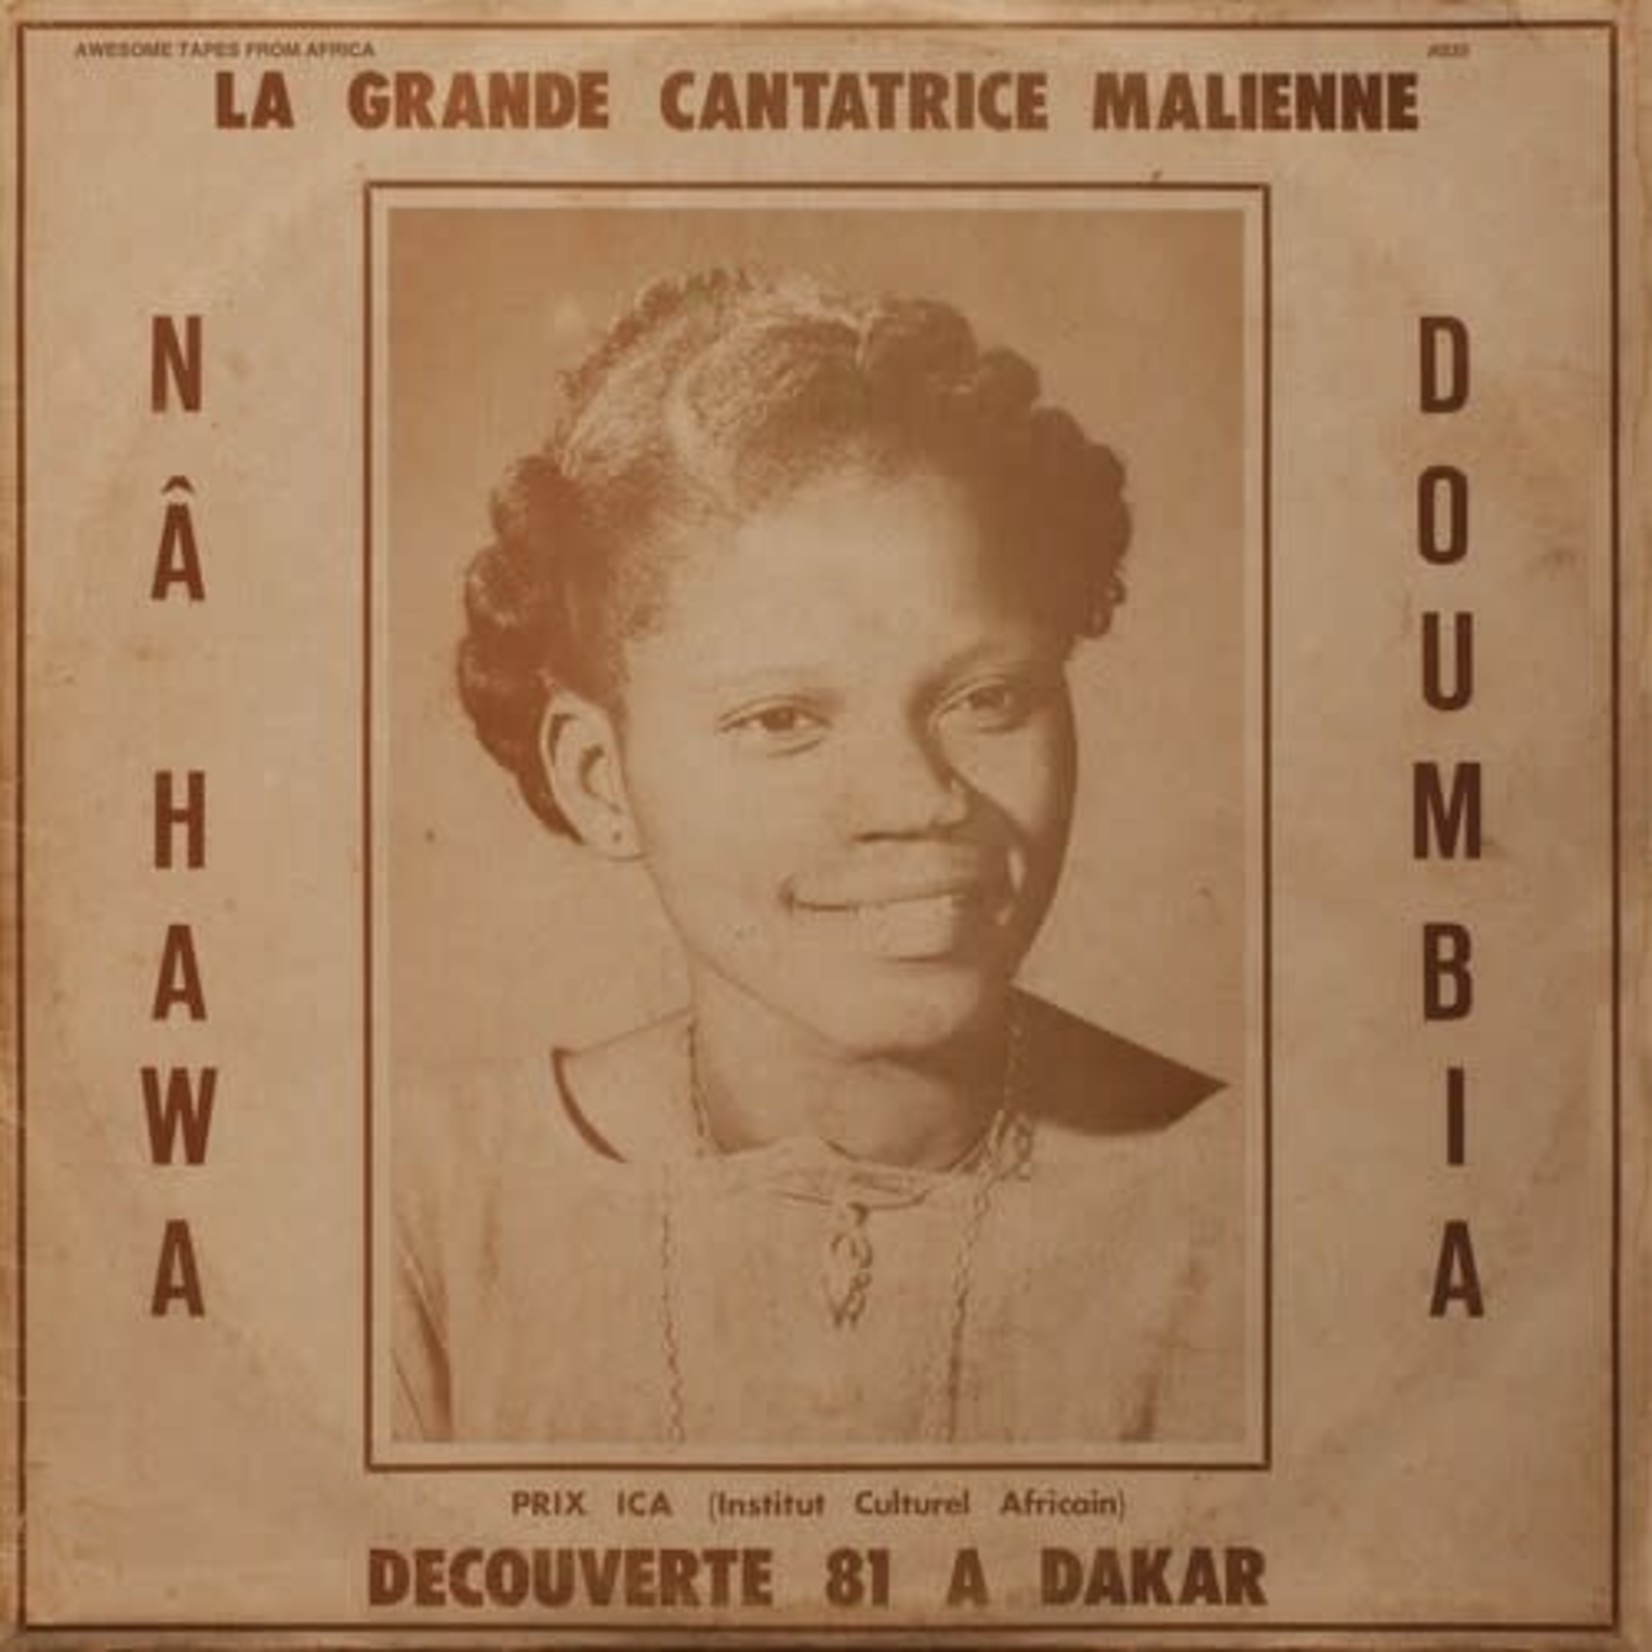 Awesome Tapes From Africa Nahawa Doumbia - La Grande Cantatrice Malienne: Decouverte 81 A Dakar (LP)